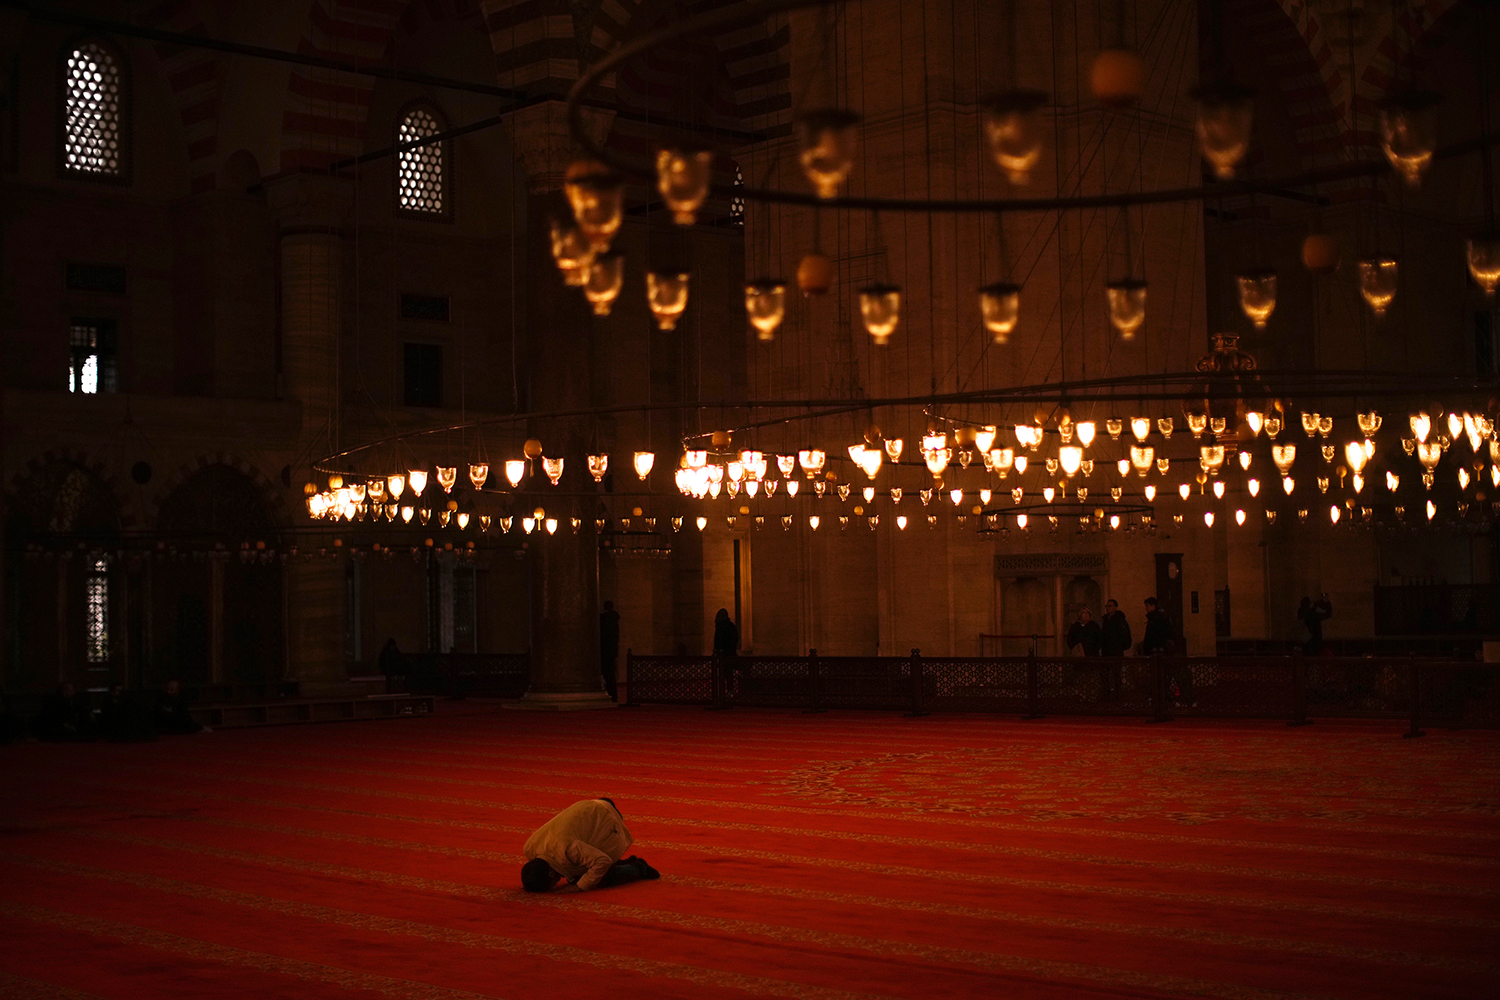 A Muslim worshipper offers a pray during the Muslim holy fasting month of Ramadan at Suleymaniye mosque in Istanbul, Turkey, Wednesday, April 5, 2023. Islam's holiest month is a period of intense prayer, dawn-to-dusk fasting and nightly feasts. (AP Photo/Francisco Seco)